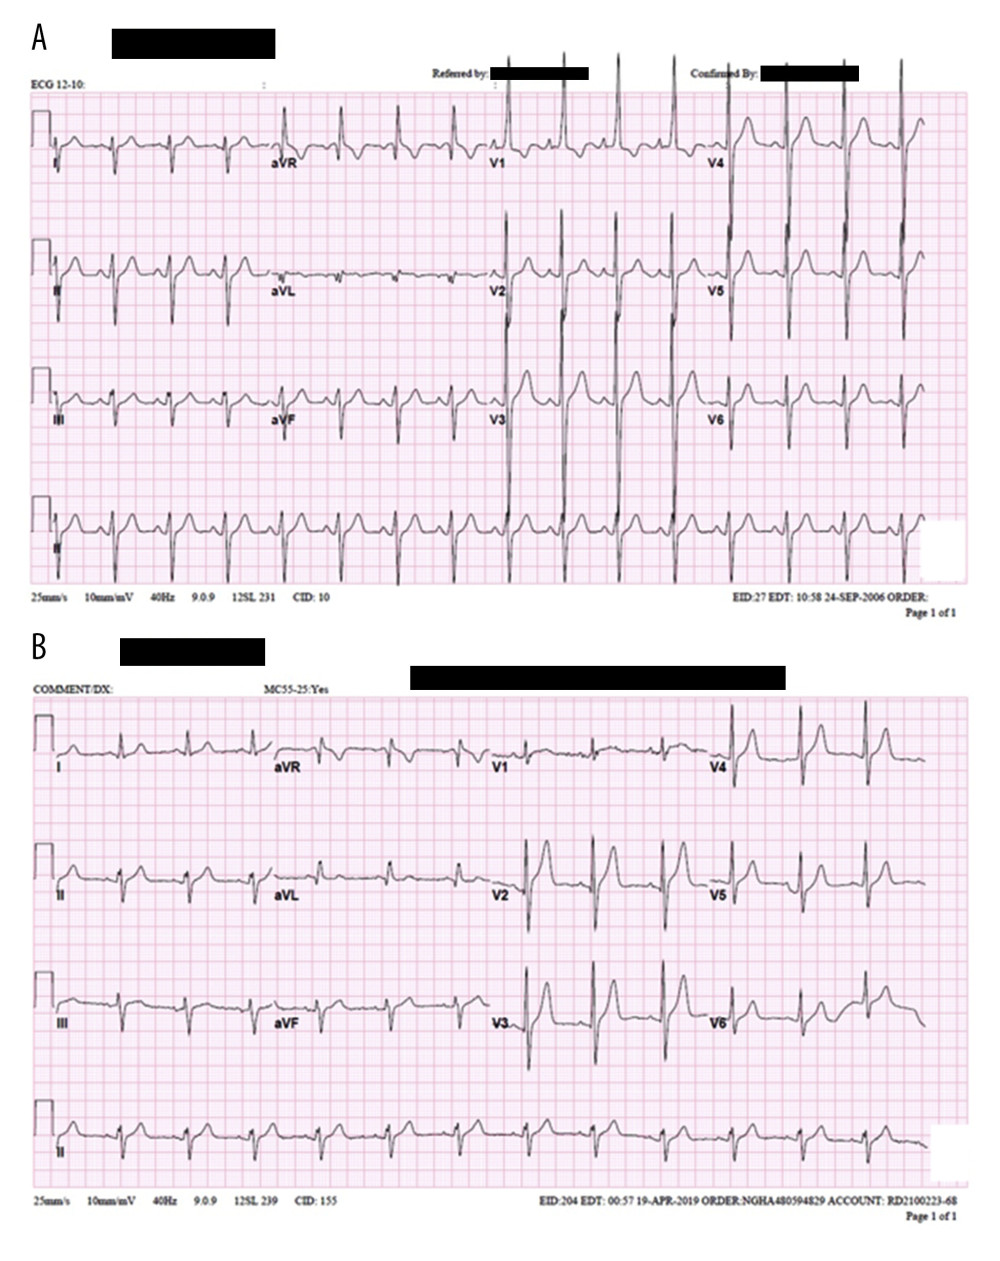 (A) An initial electrocardiogram (ECG) highlighting a ventricular rate of 92 beats per minute (BPM), a PR interval of 152 milliseconds (ms), a QRS duration of 106 ms, a QT/QTc interval of 360/445 ms, and P-R-T axes at 68, 236, and 61 degrees, respectively. (B) A post-treatment ECG demonstrating a ventricular rate of 77 BPM, a PR interval of 136 ms, a QRS duration of 104 ms, a QT/QTc interval of 368/416 ms, and a corrected P-R-T axis, reflecting the normalization of post-intervention cardiac electrical activity.